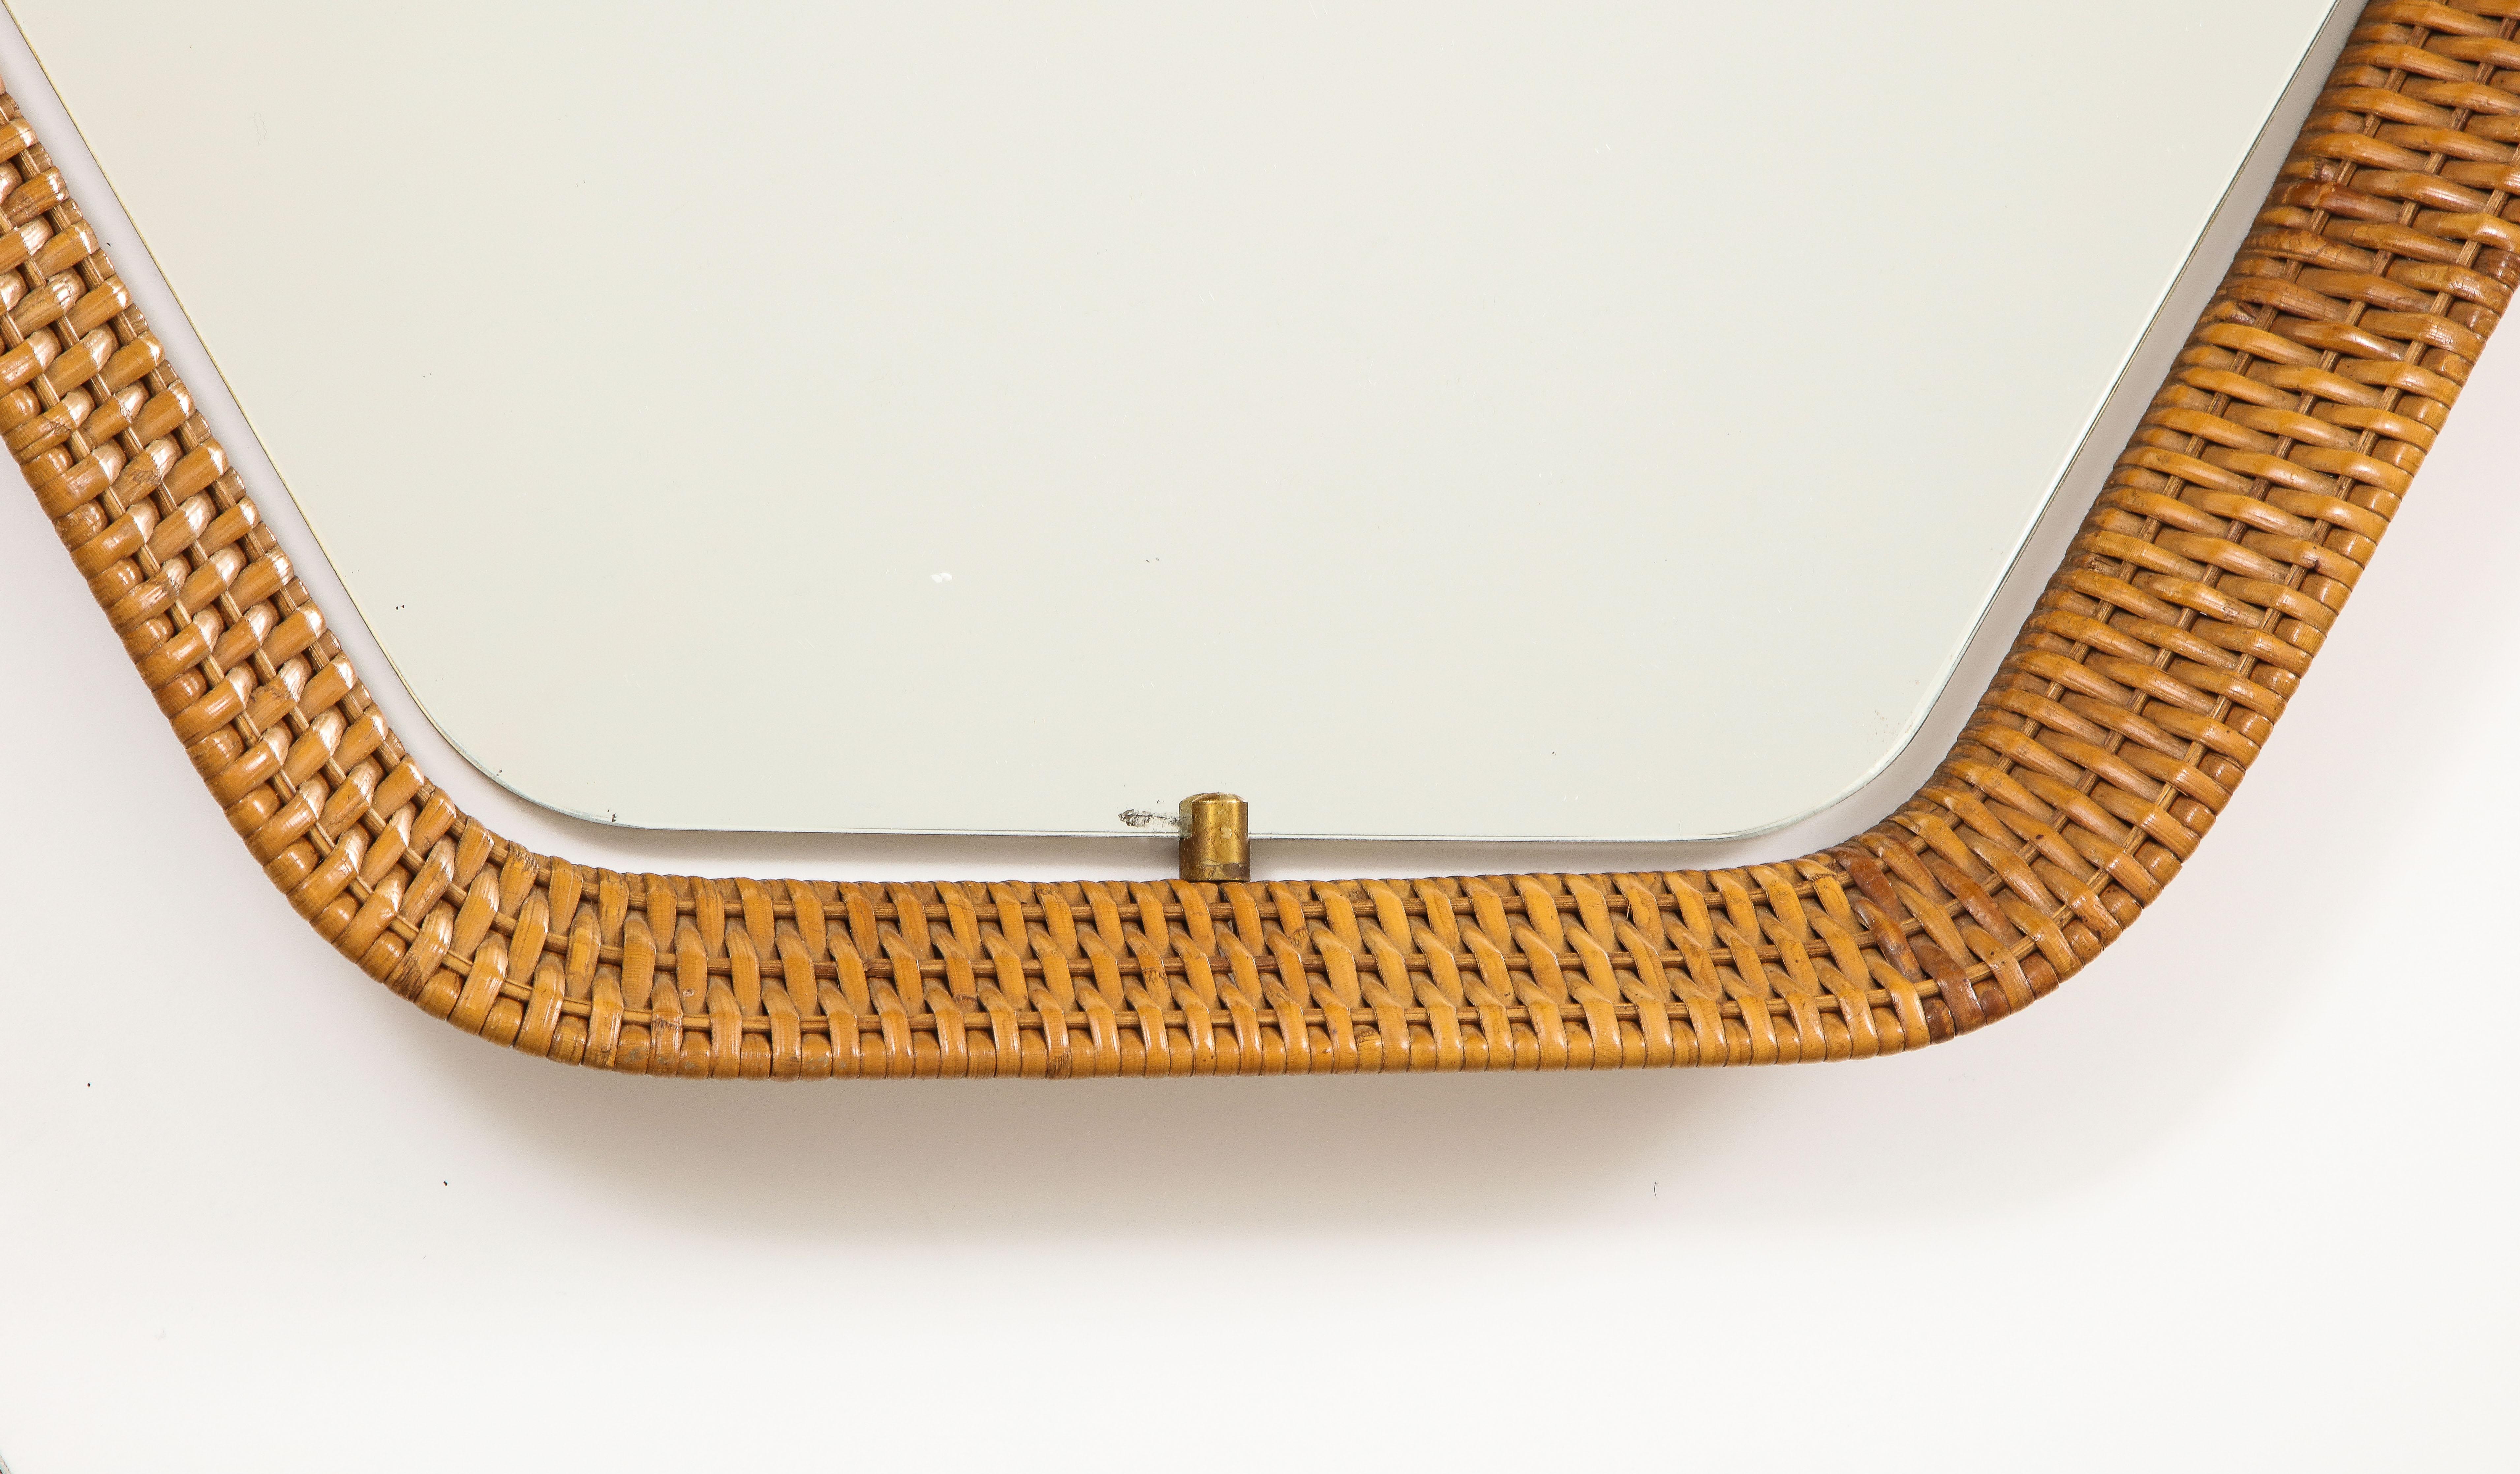 Italian Rattan and Brass Hexagon Shaped Mirror by Cantu, 1950s For Sale 2